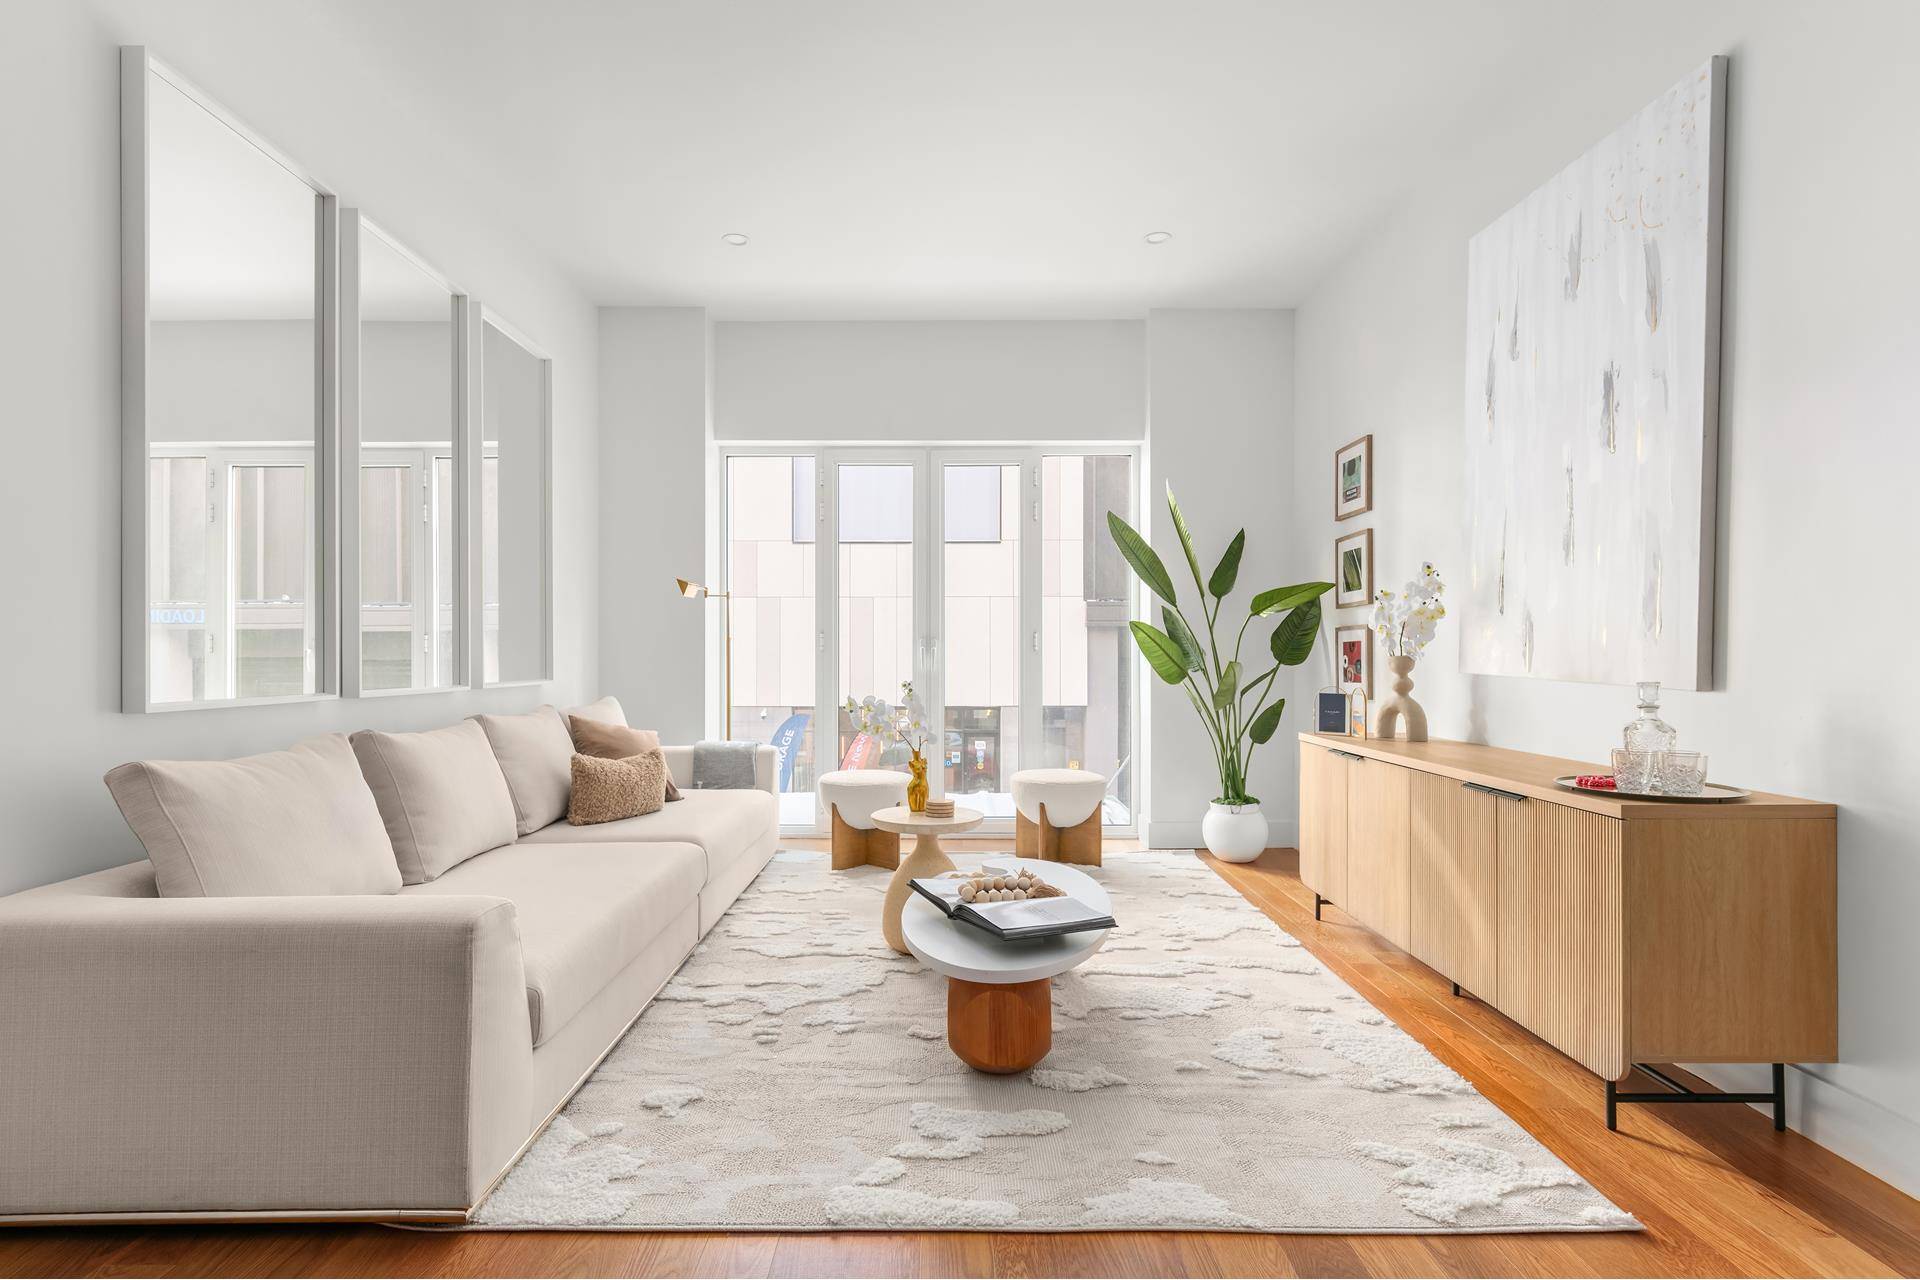 Introducing 2C at 427 E 90th Street An oversized 1 bed, 1 bath apartment at Gracie Green, a stunning new development in a tranquil pocket of the Upper East side ...